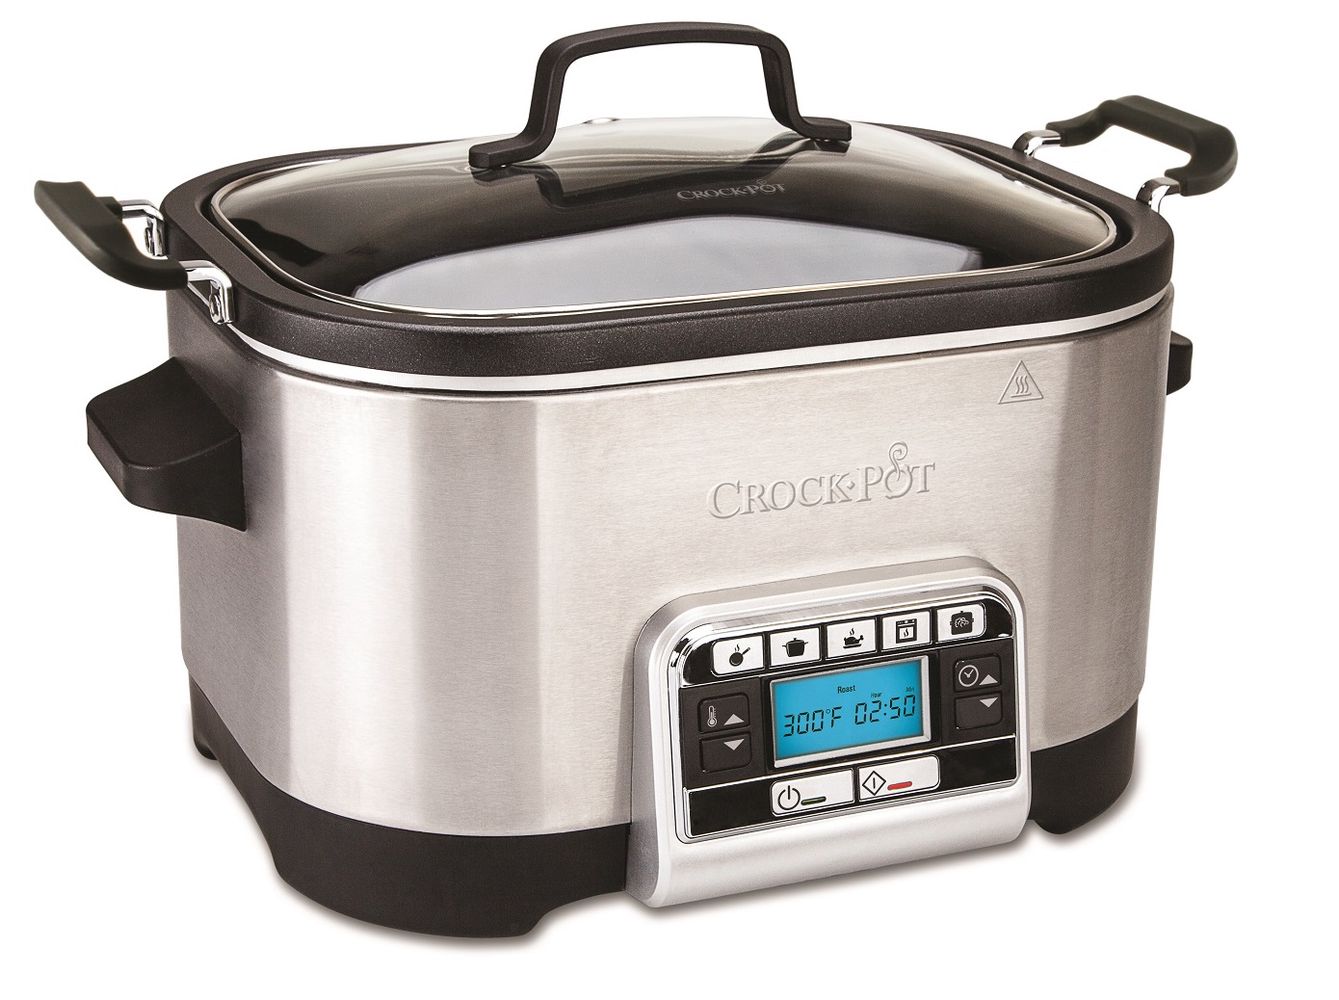 Buy Crockpot 5.6L Slow Cooker - Stainless Steel | Slow cookers | Argos